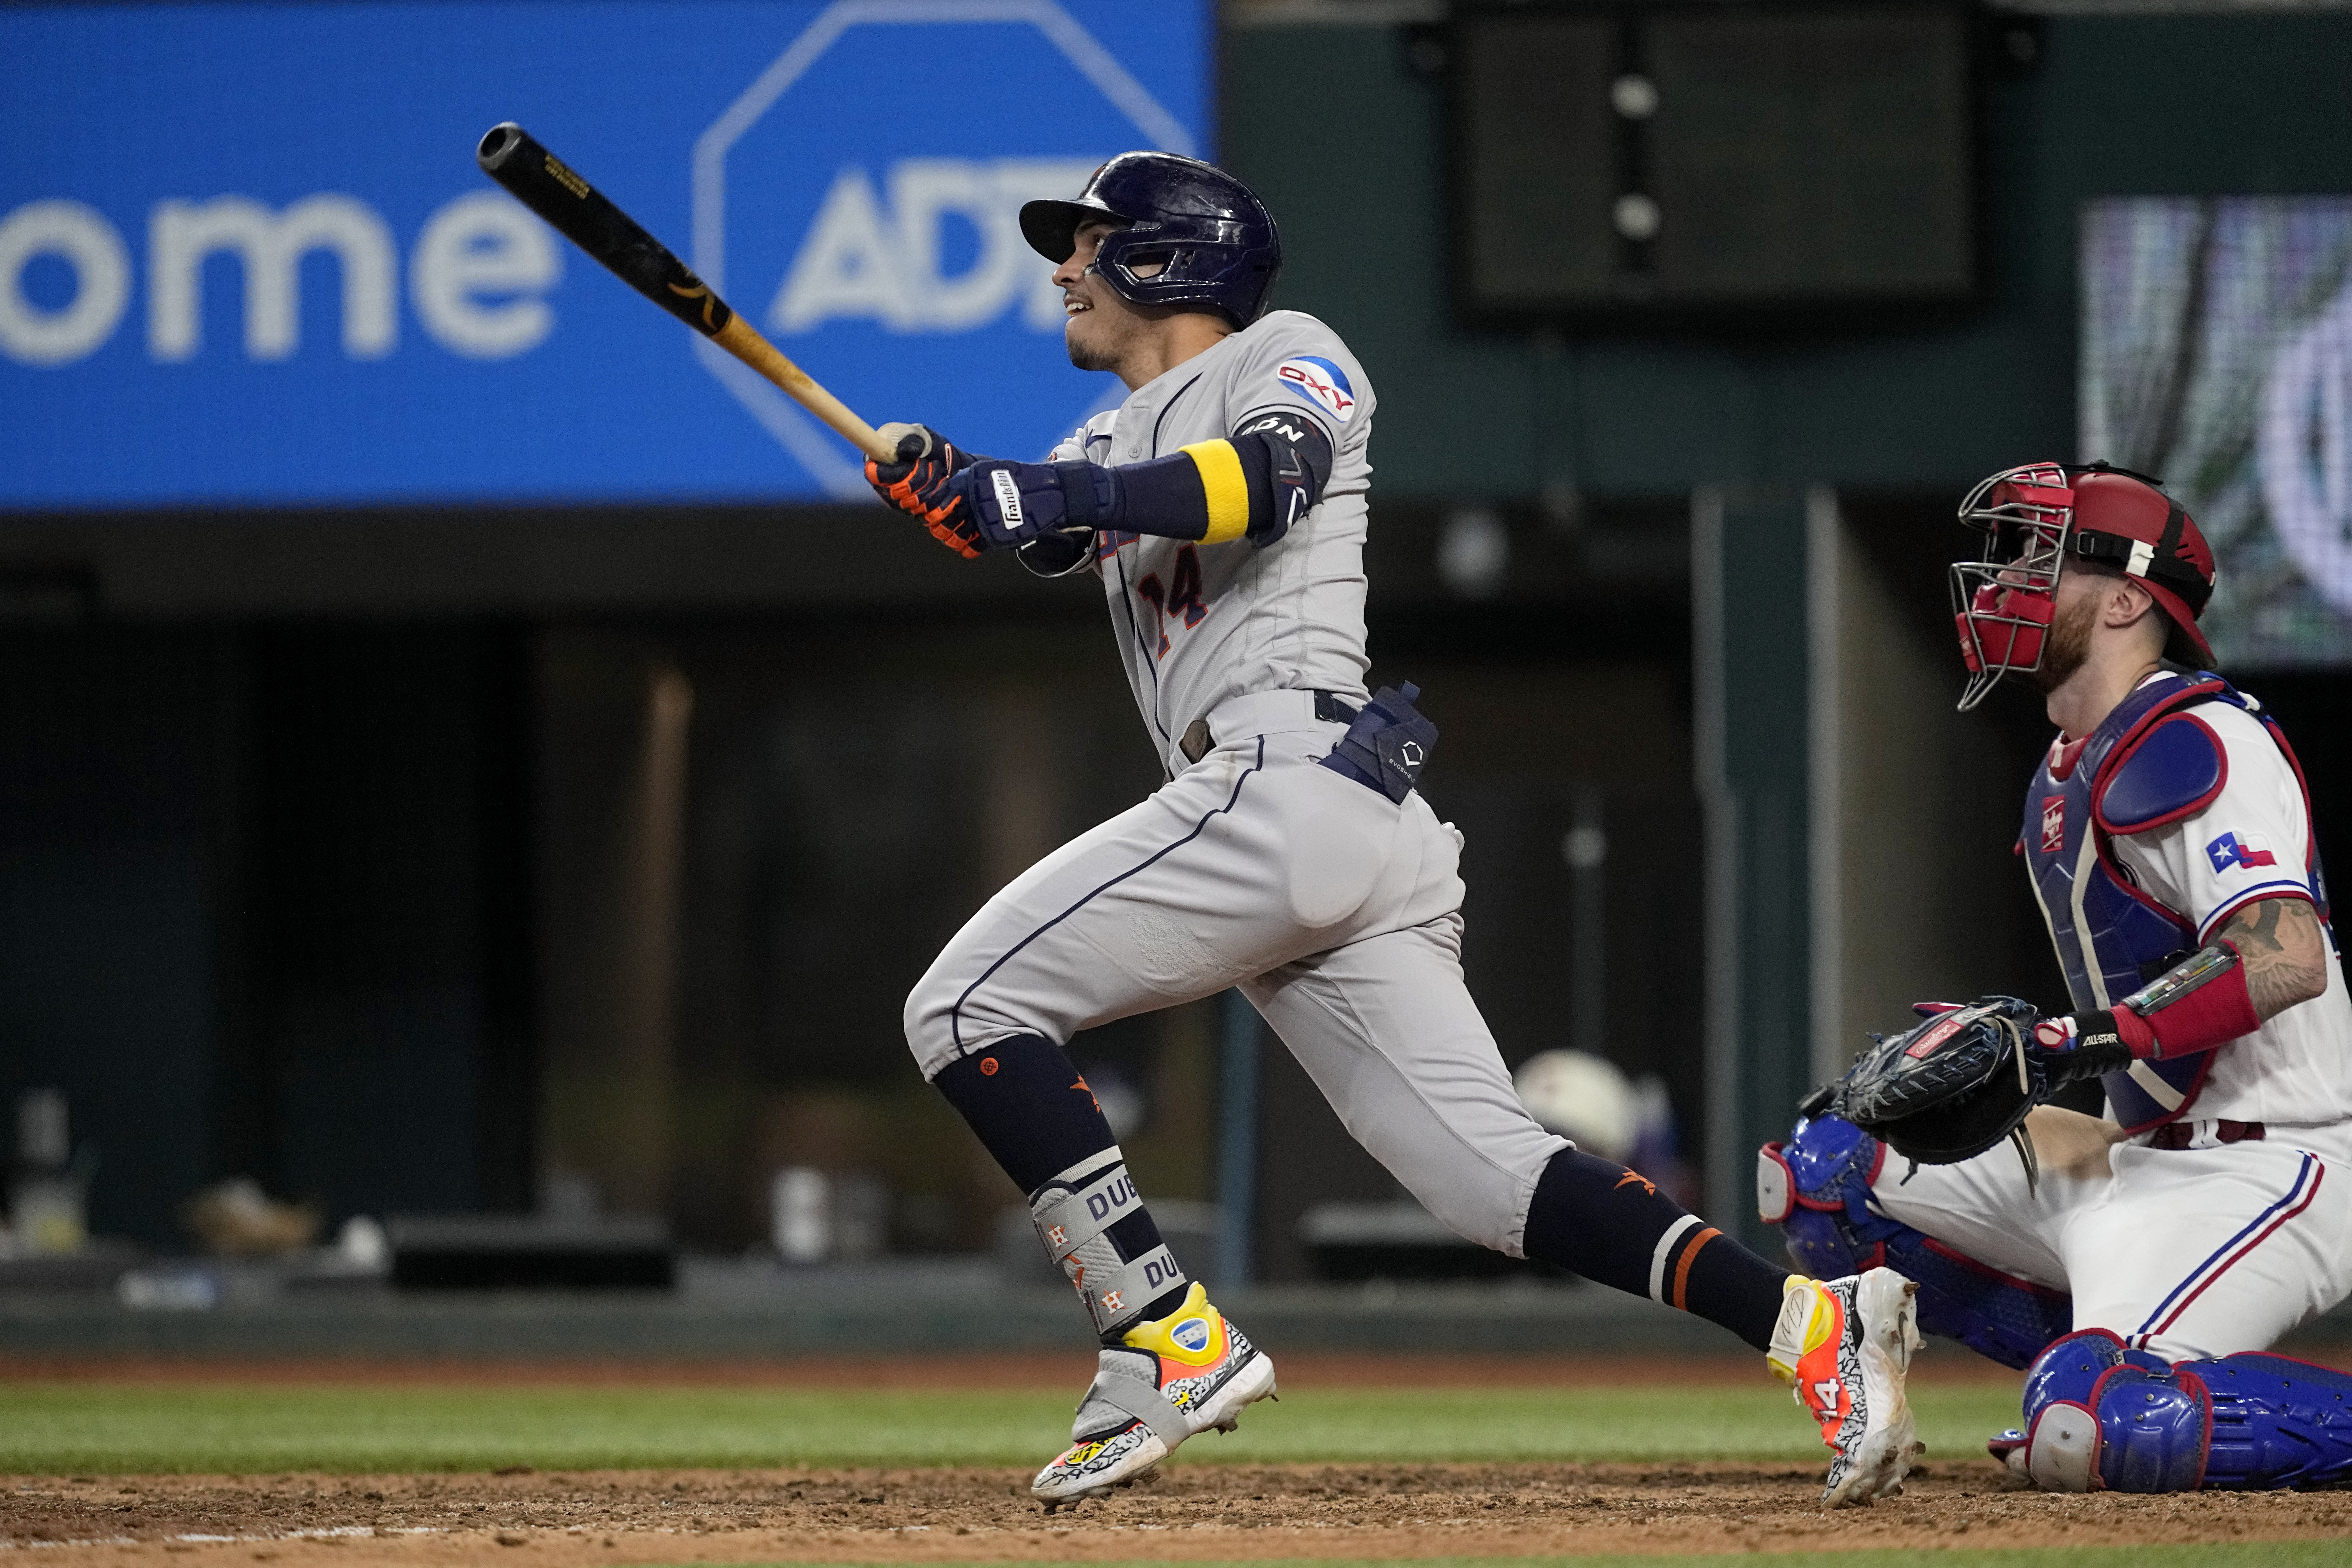 Jose Altuve's three-run shot gives Astros 3-2 series lead over Rangers, National